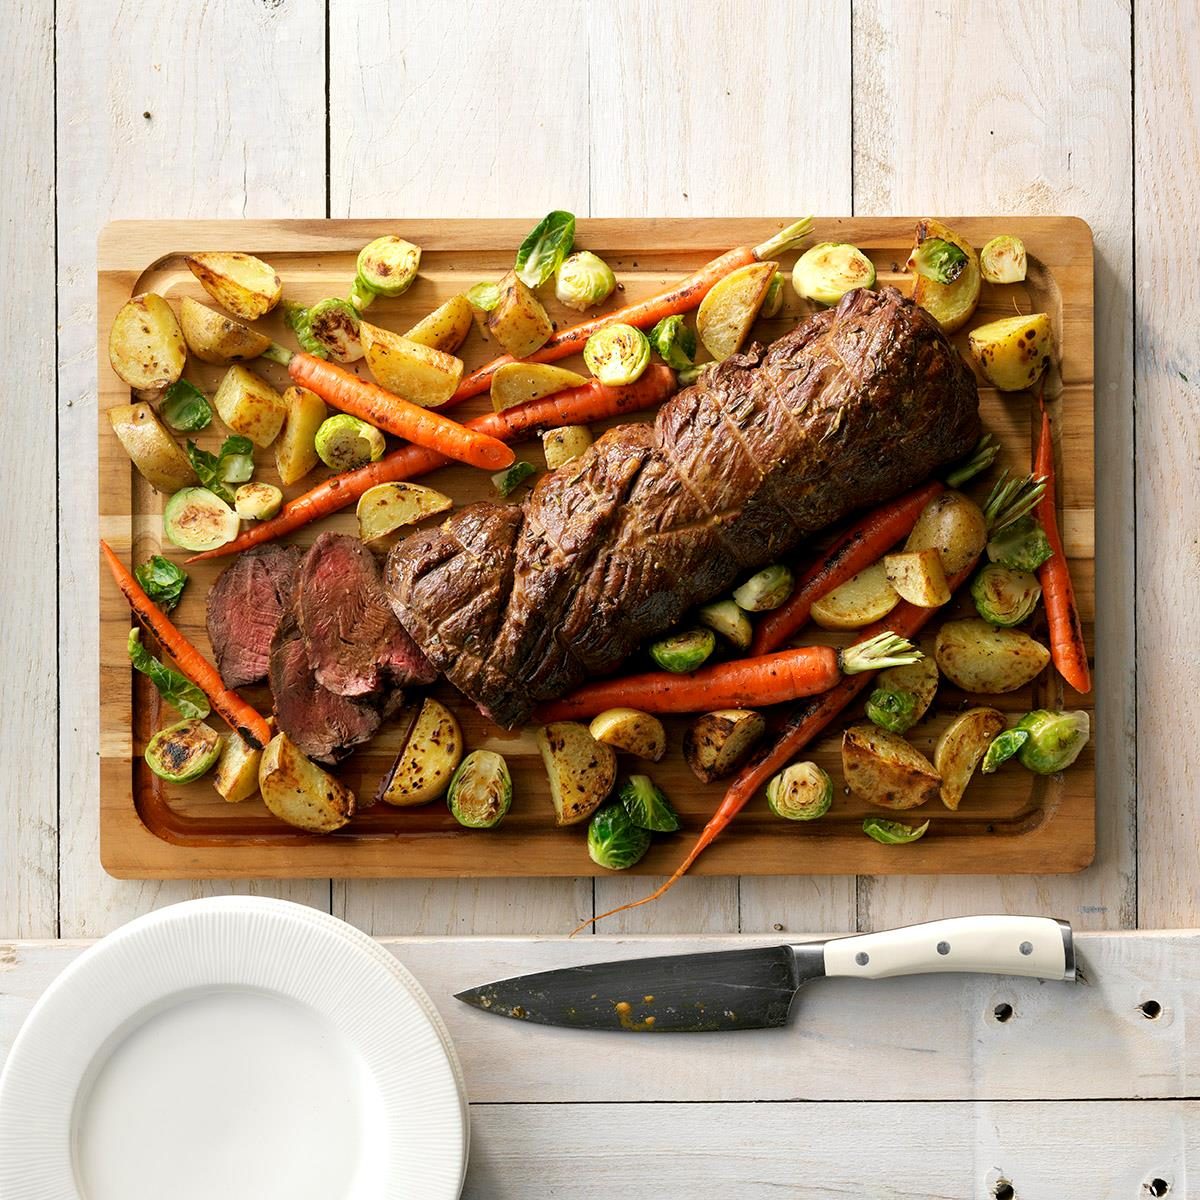 Beef Tenderloin With Roasted Vegetables Recipe How To Make It Taste Of Home